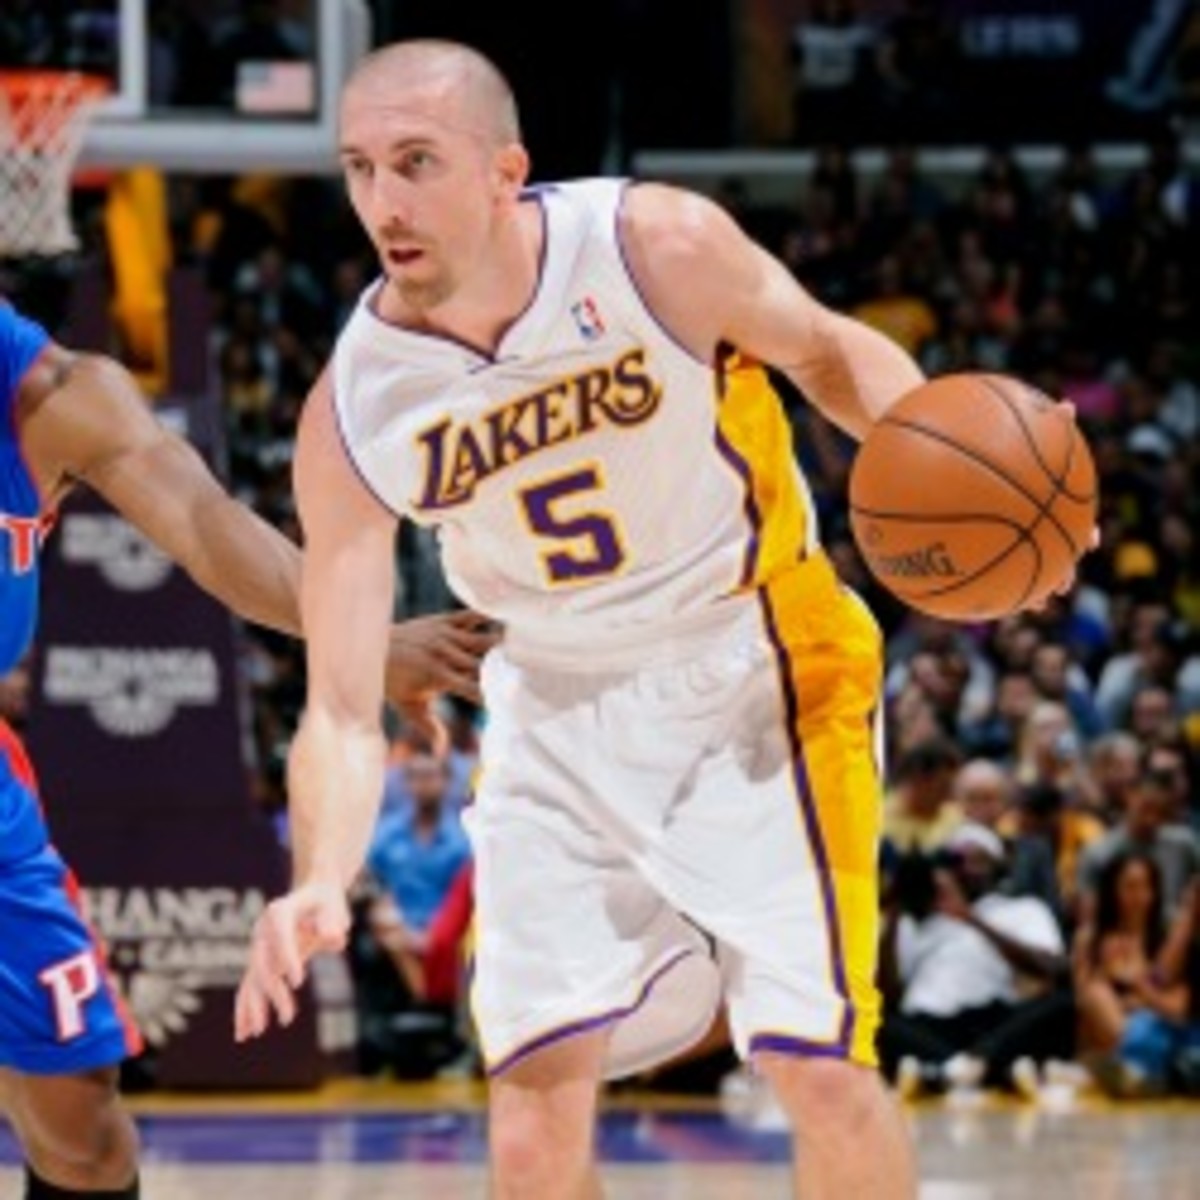 Lakers guard Steve Blake will miss 6 to 8 weeks after surgery to repair a torn abdominal muscle. (Andrew D. Bernstein/Getty Images)